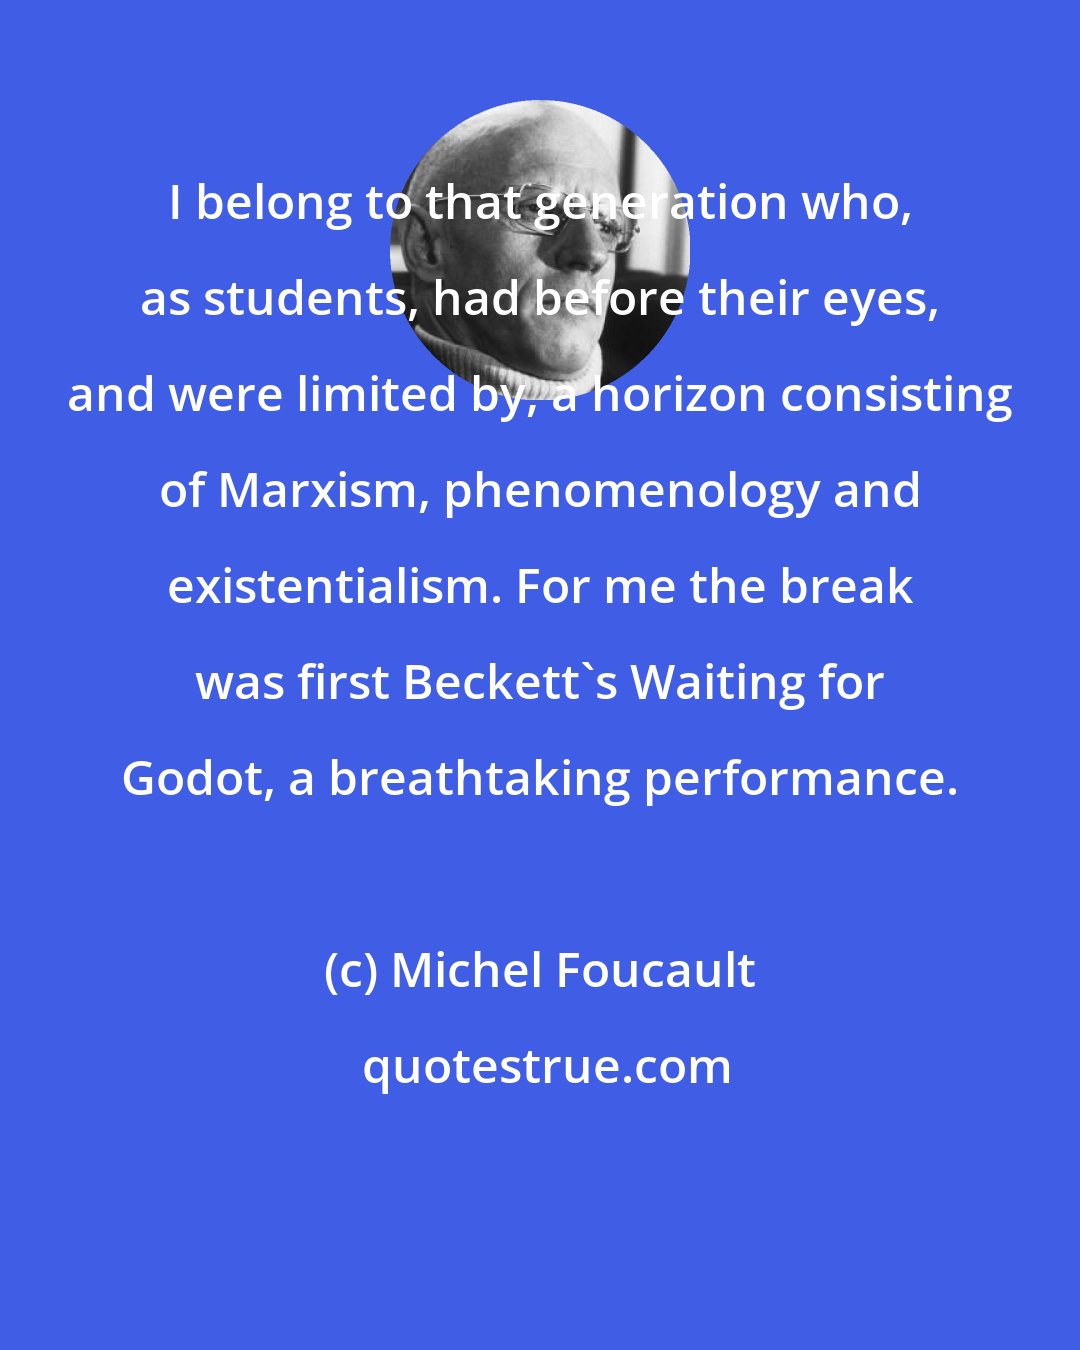 Michel Foucault: I belong to that generation who, as students, had before their eyes, and were limited by, a horizon consisting of Marxism, phenomenology and existentialism. For me the break was first Beckett's Waiting for Godot, a breathtaking performance.